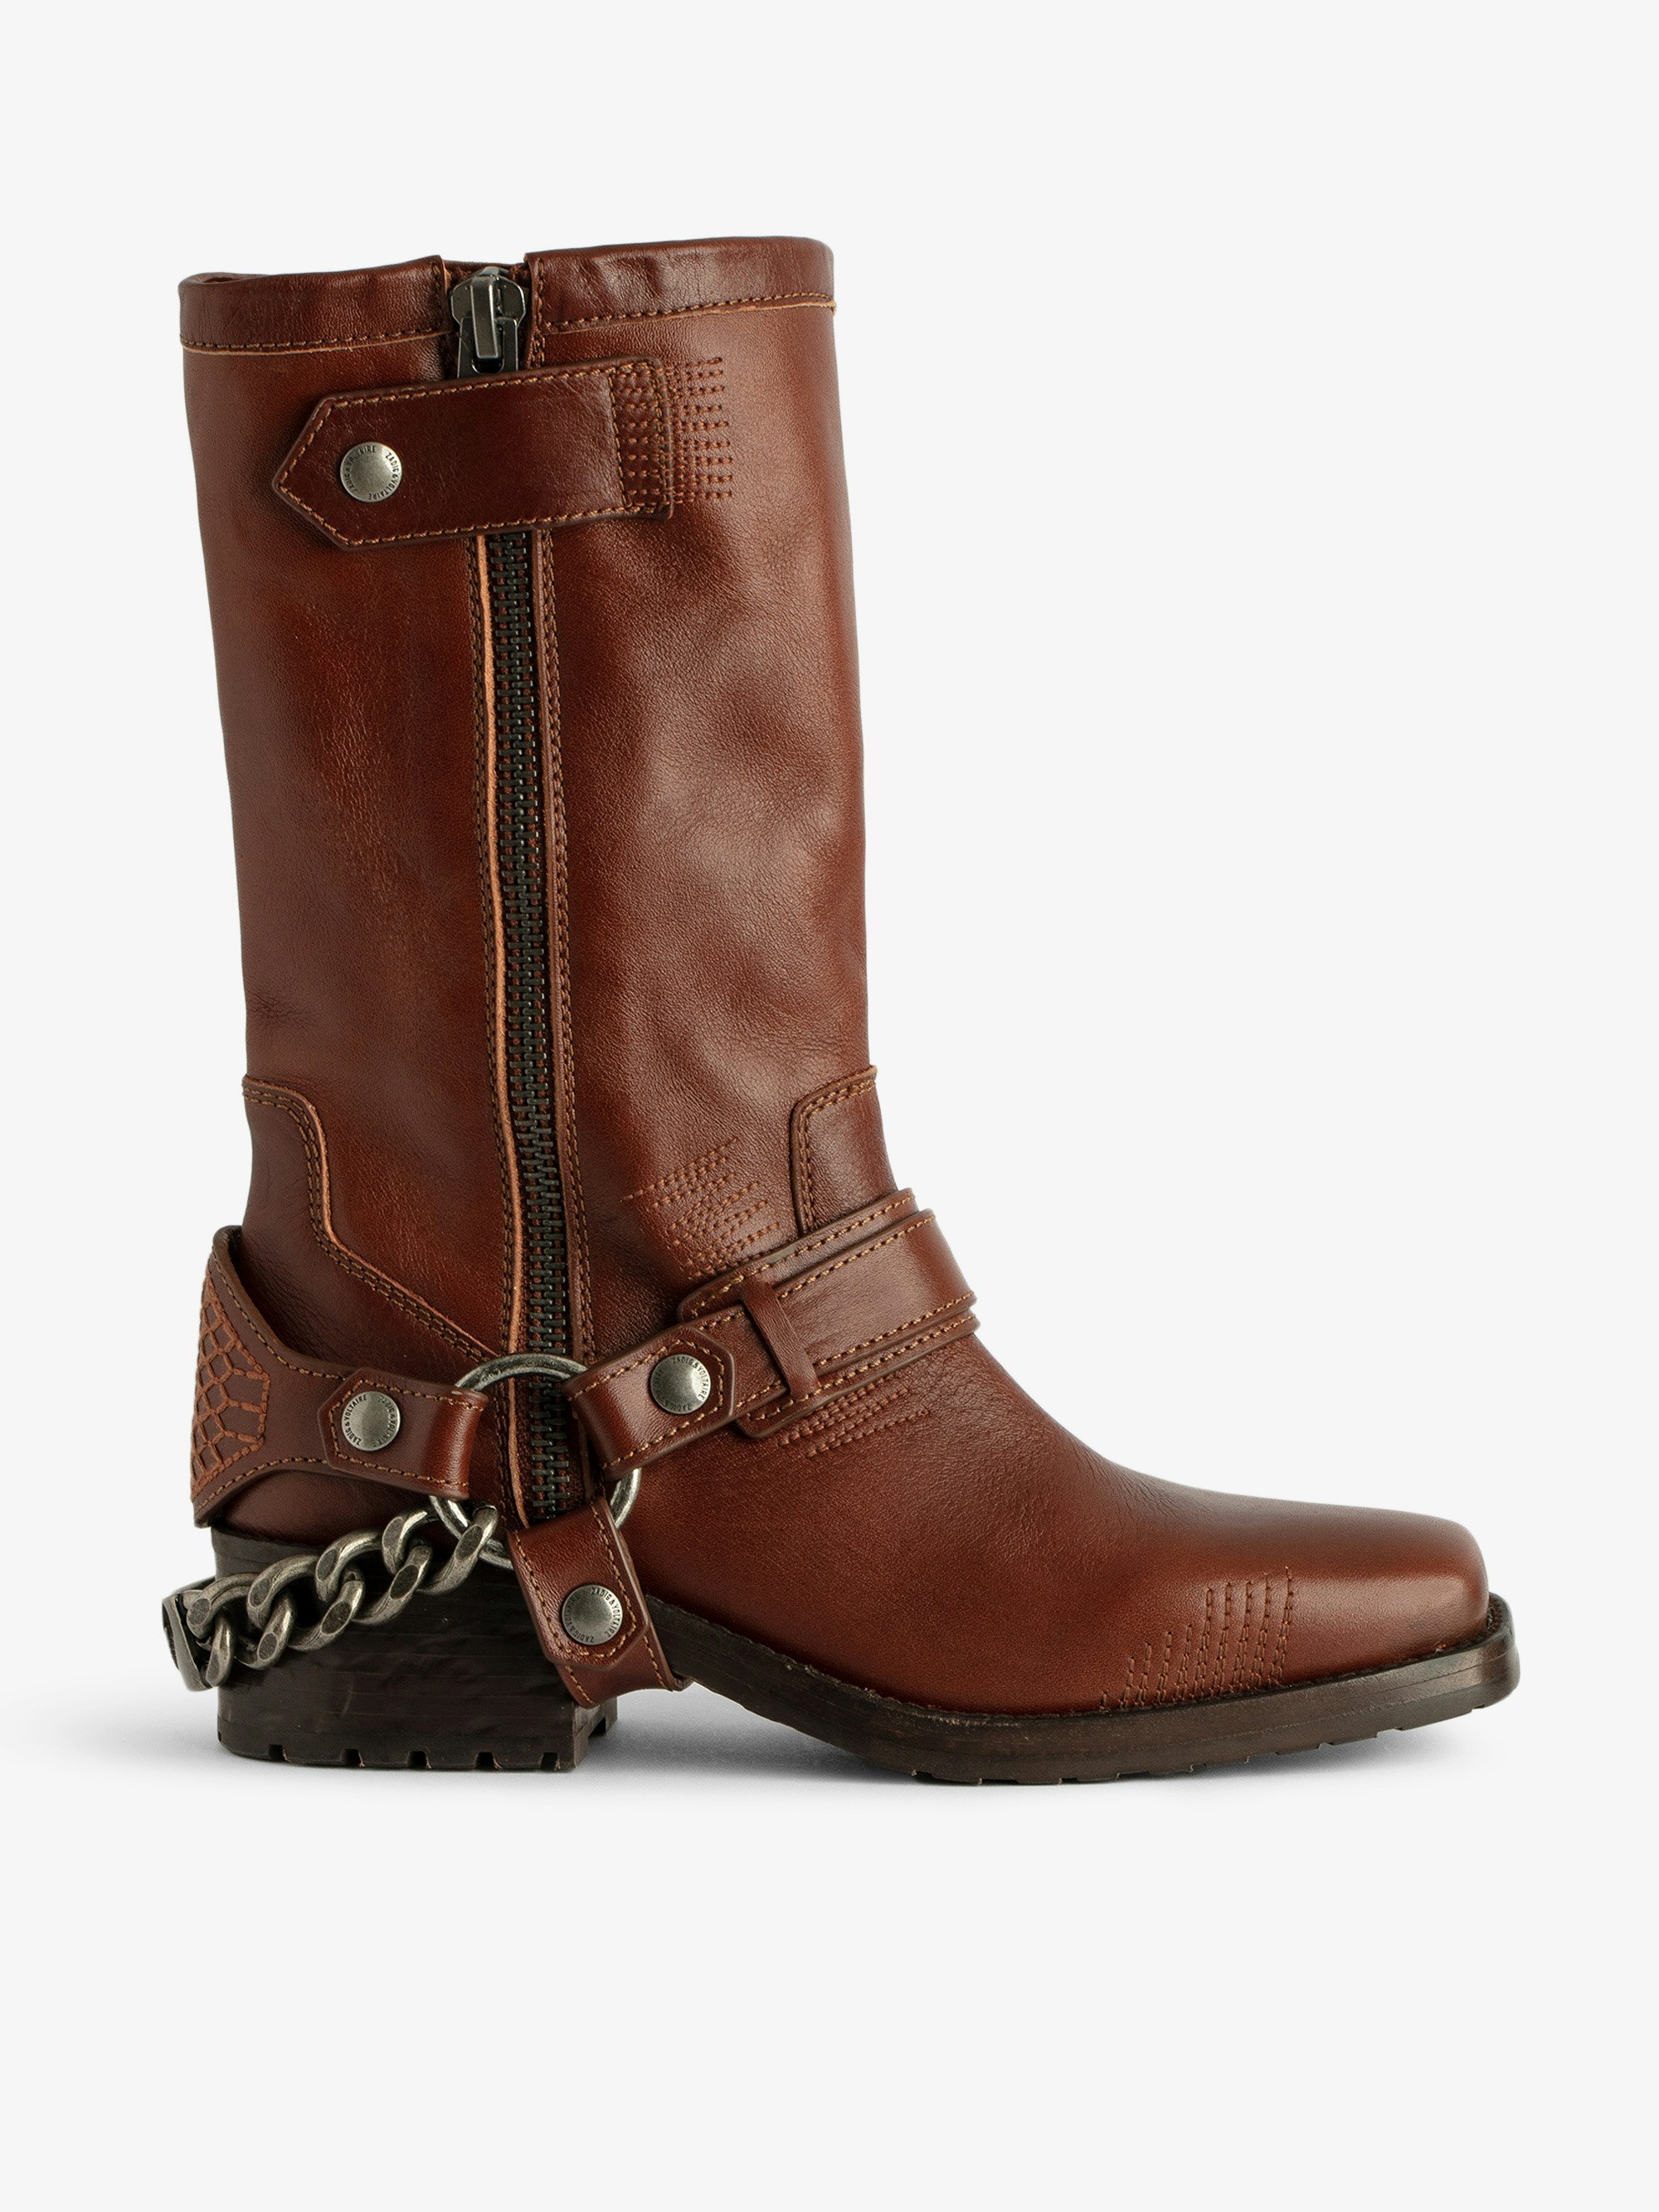 Igata Ankle Boots - Camel vegetable-tanned long ankle boots with metal chains.